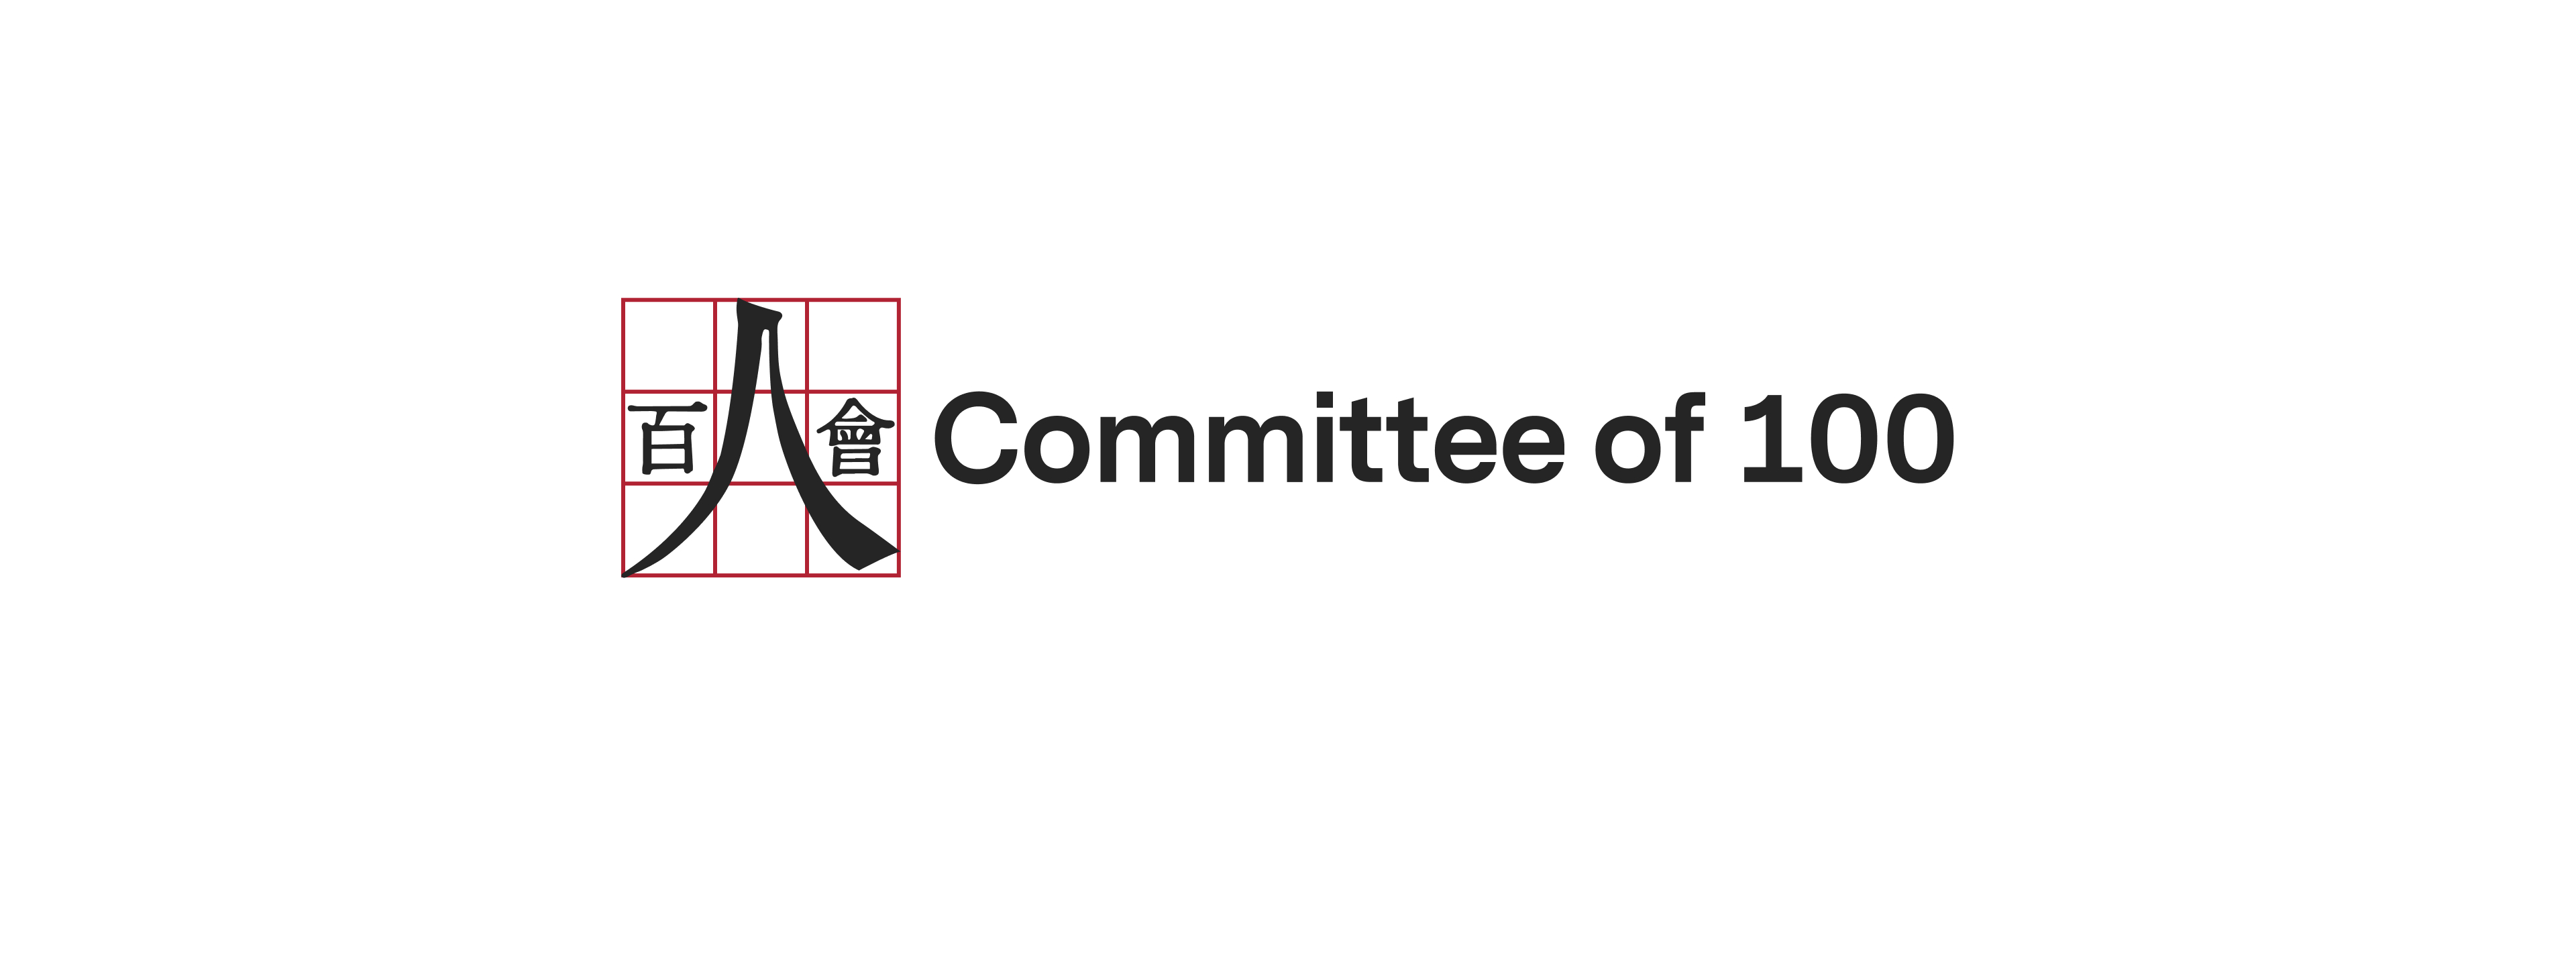 Statement from Committee of 100 on the Recent Rise in Antisemitism